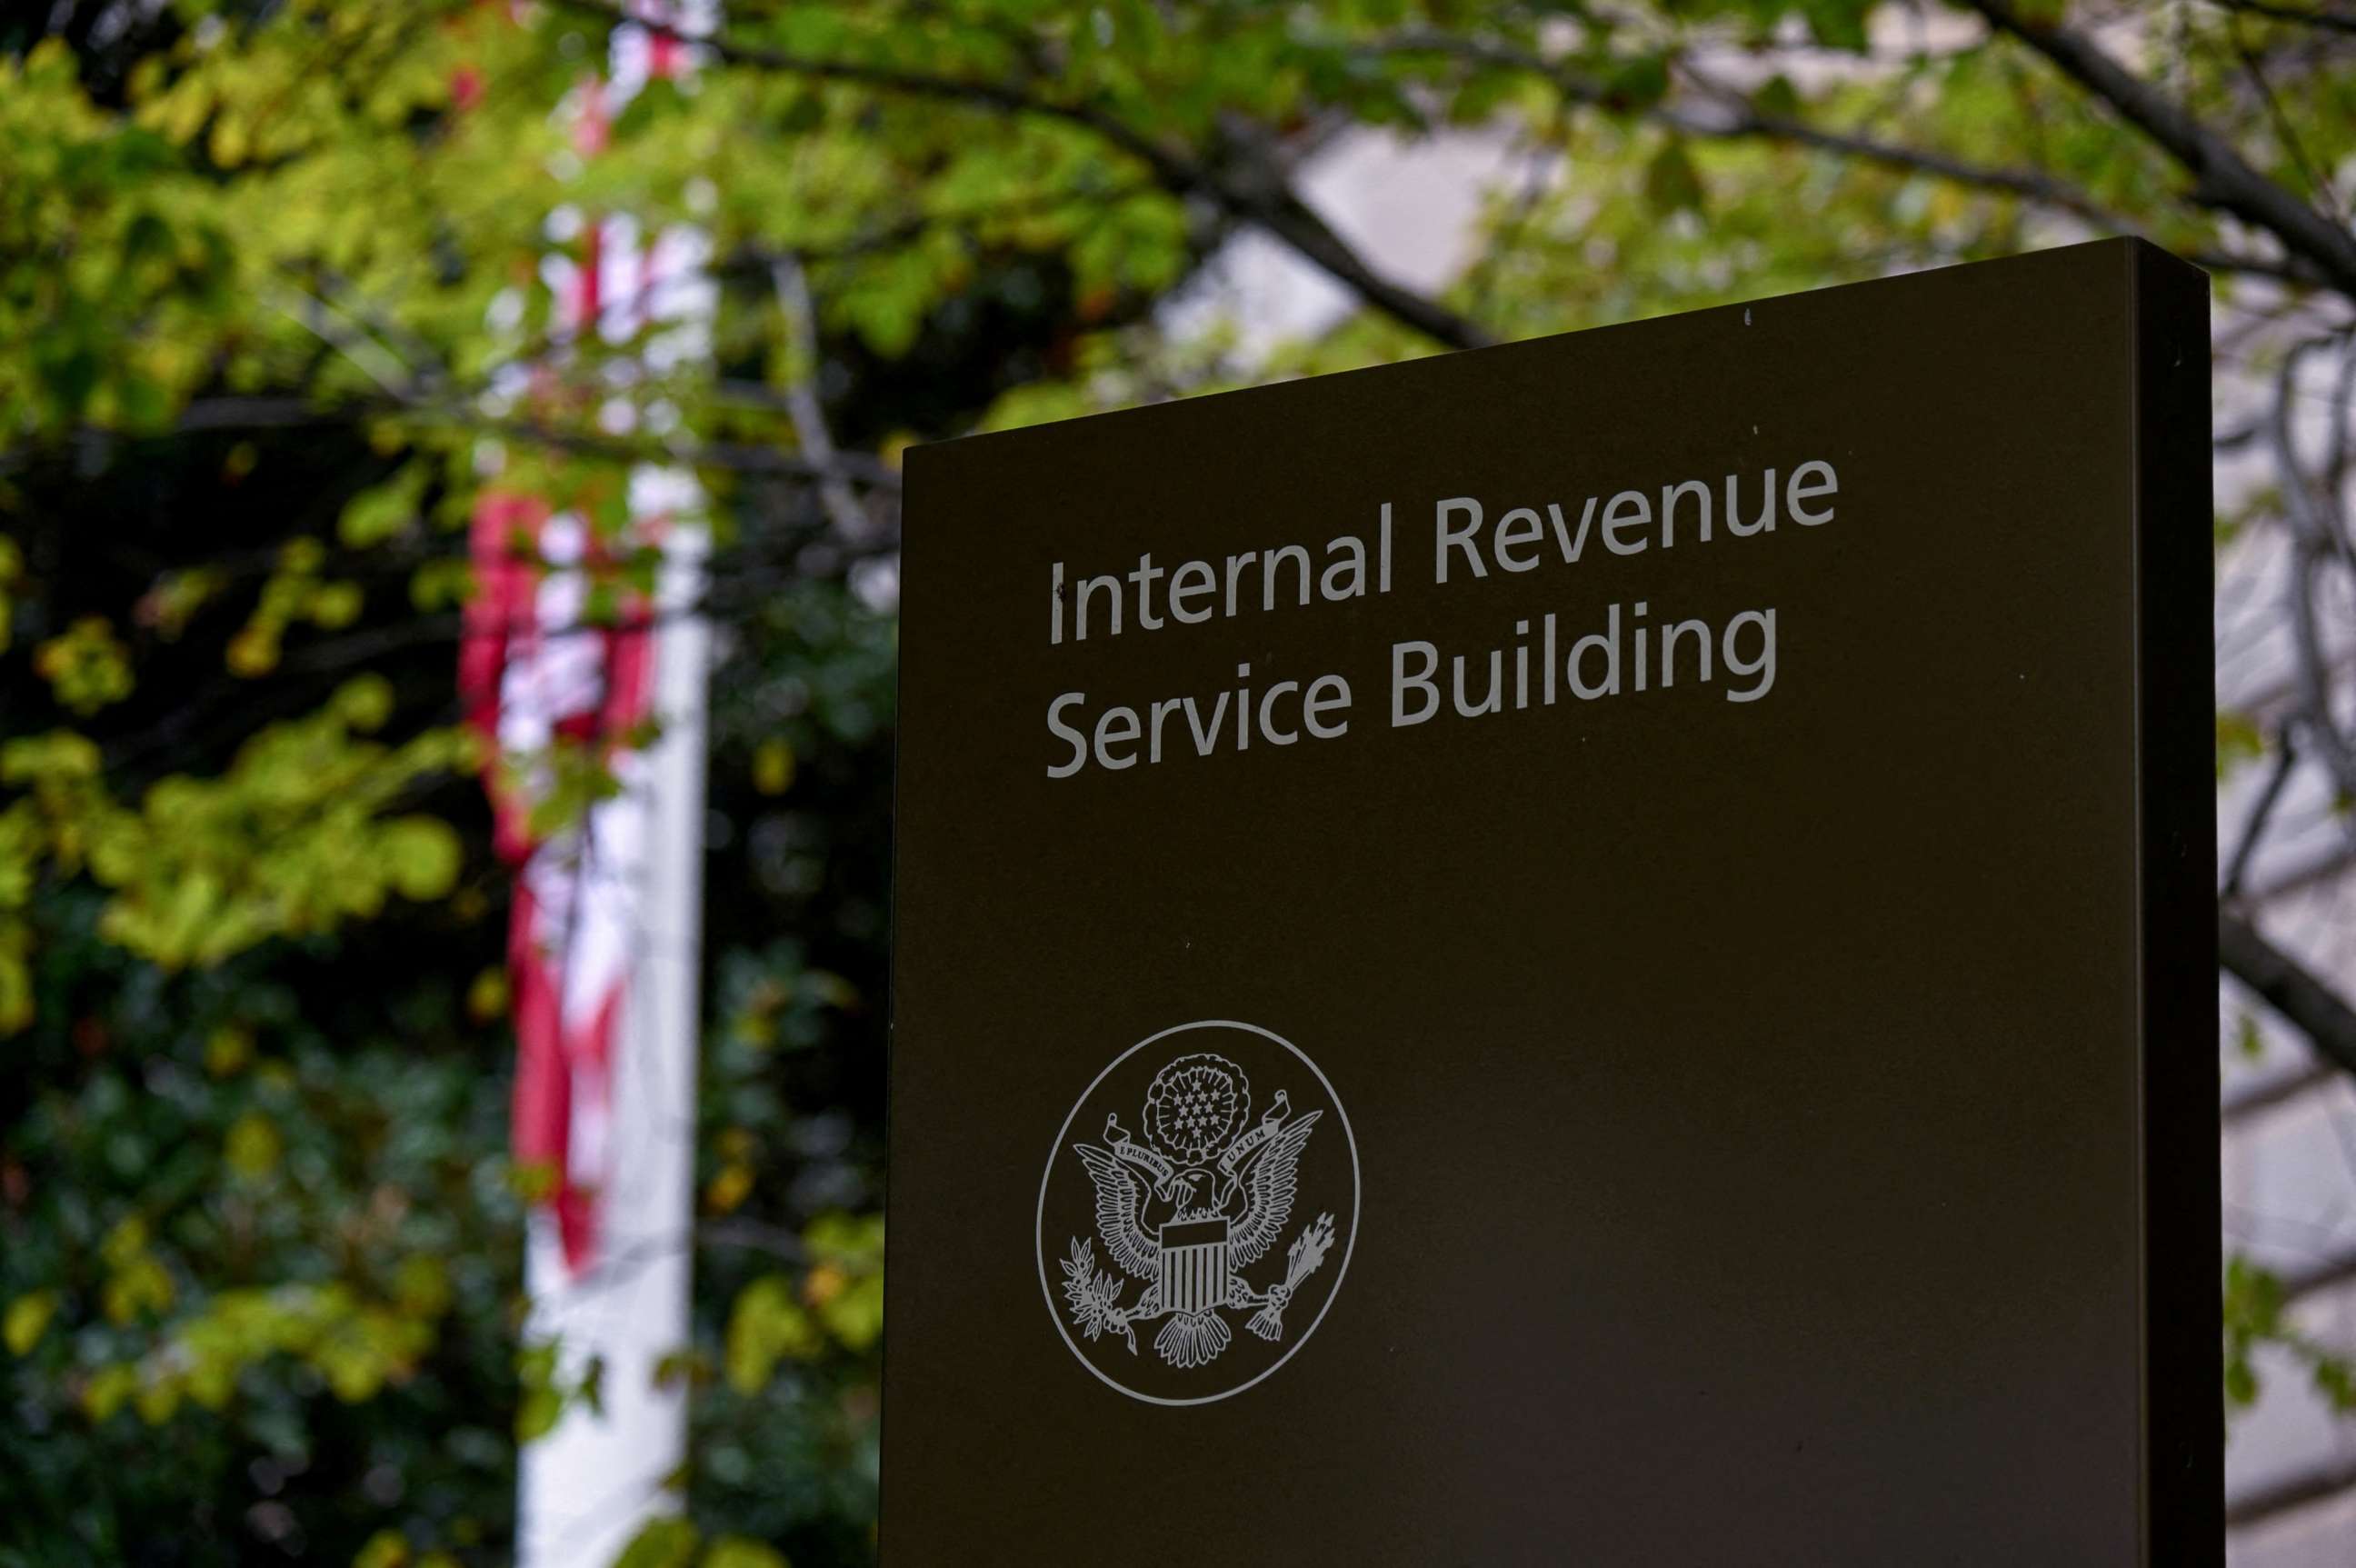 PHOTO: A sign for the Internal Revenue Service (IRS) building is seen in Washington, Sept. 28, 2020.